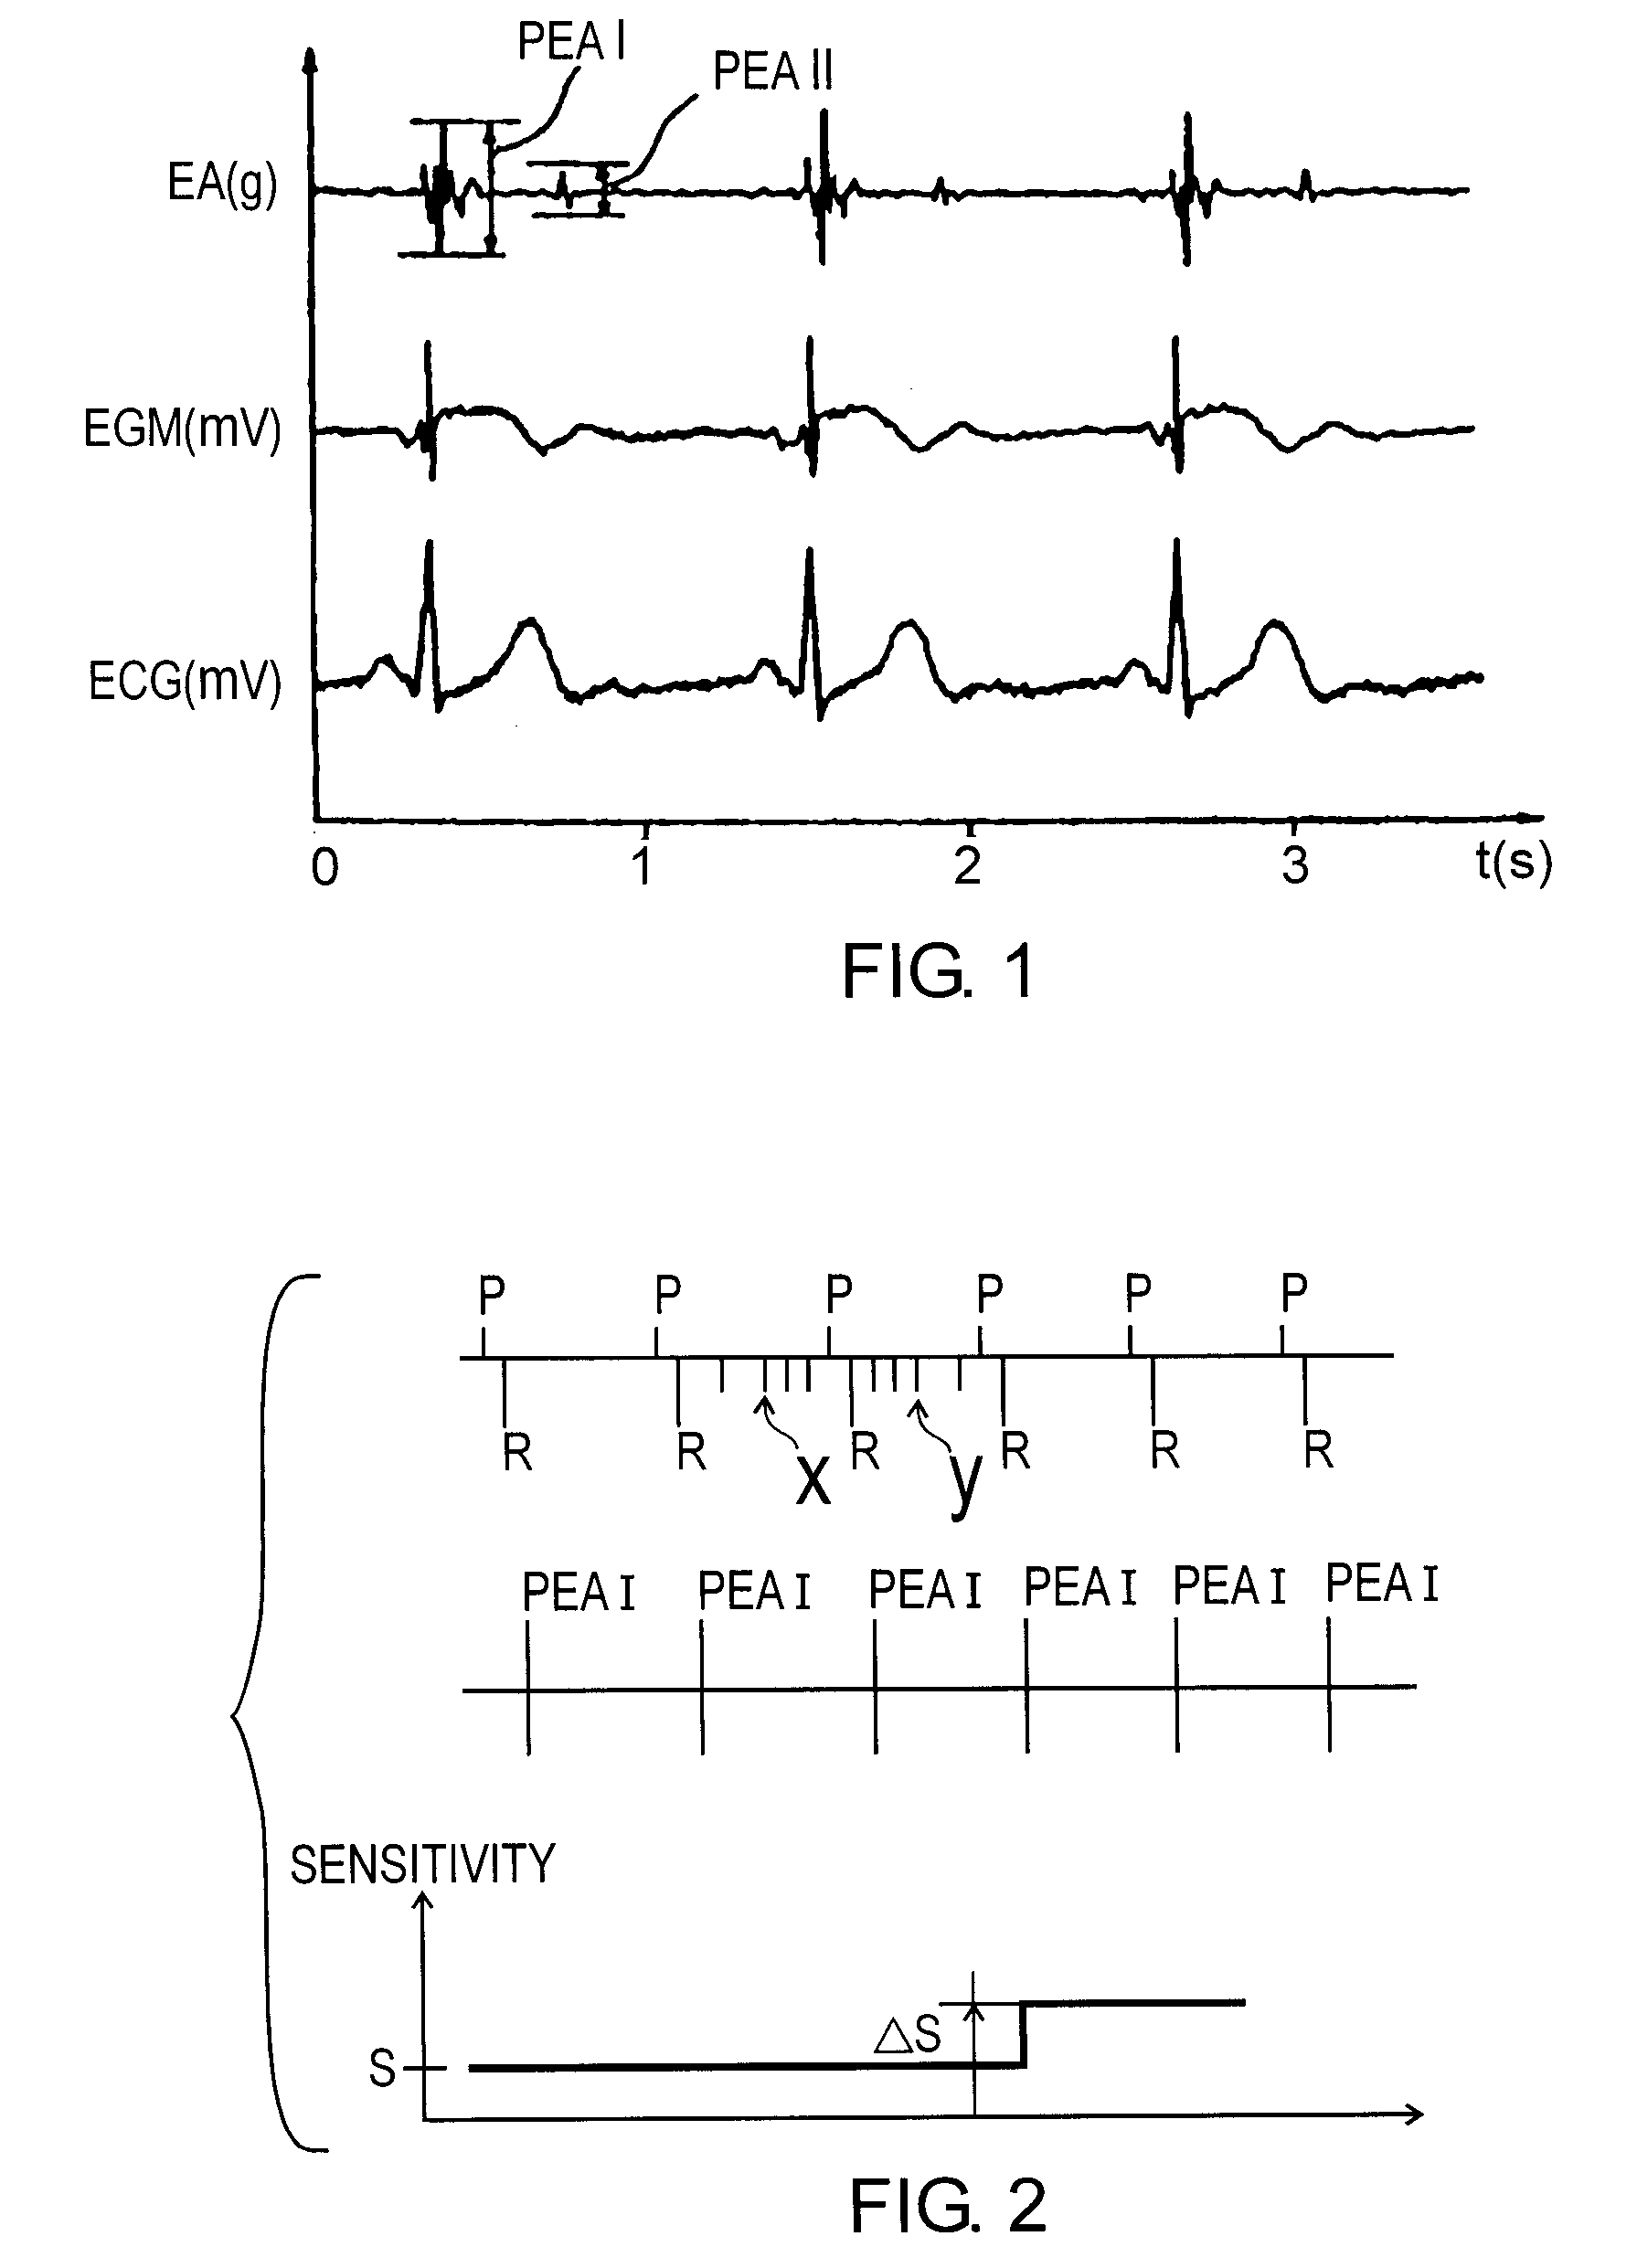 Detecting ventricular noise artifacts in an active implantable medical device for pacing, resynchronization and/or defibrillation of the heart